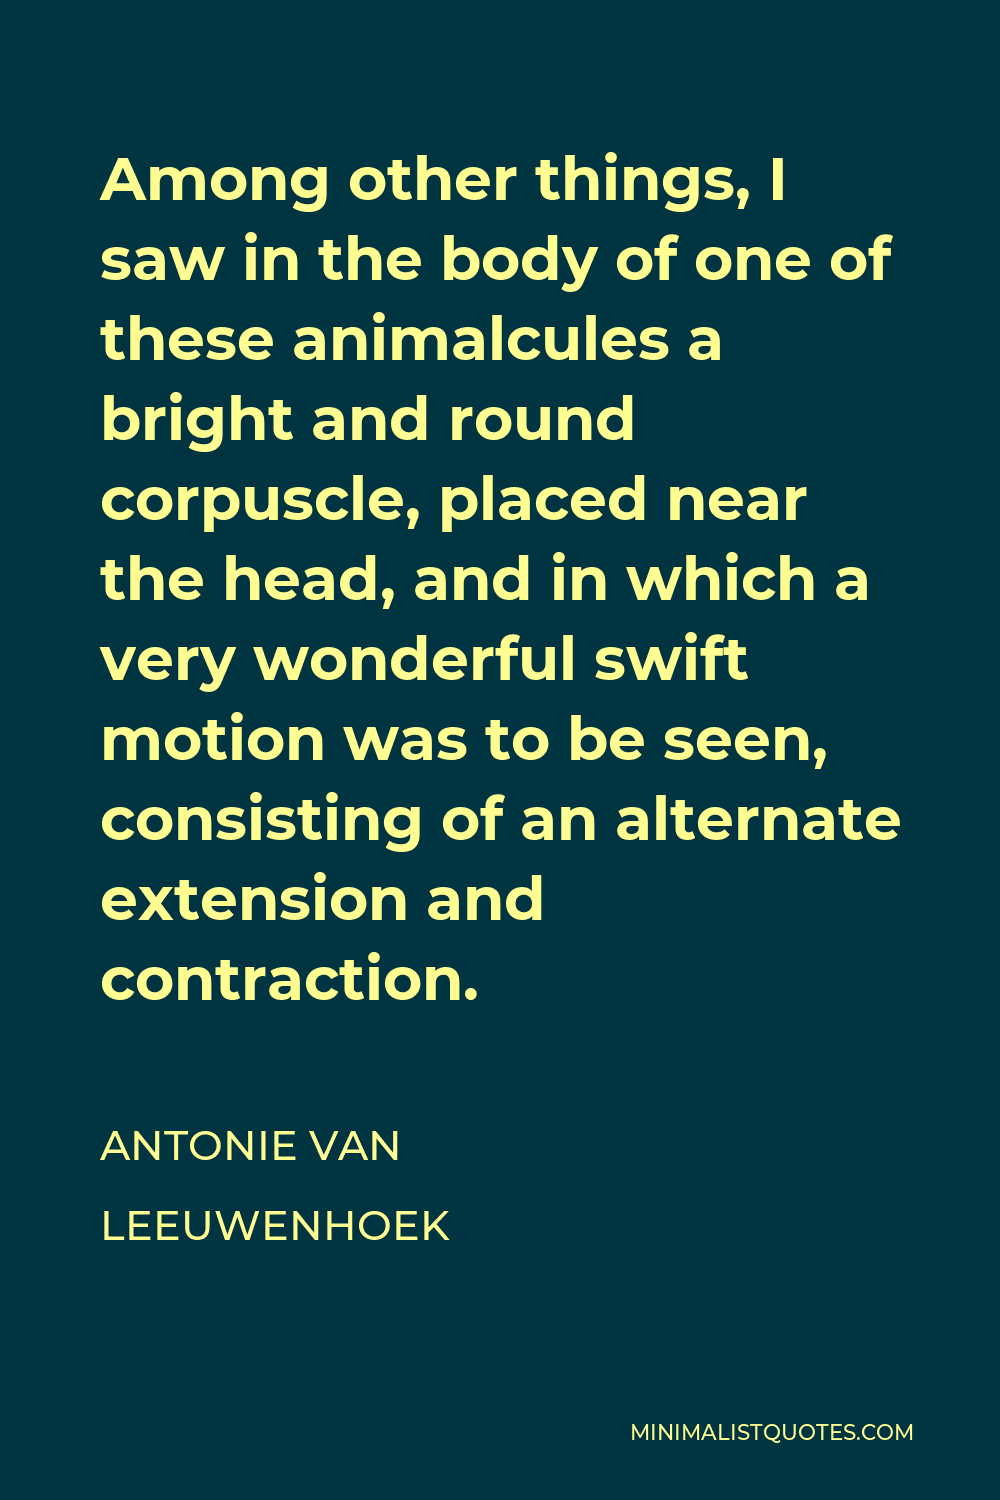 Antonie van Leeuwenhoek Quote - Among other things, I saw in the body of one of these animalcules a bright and round corpuscle, placed near the head, and in which a very wonderful swift motion was to be seen, consisting of an alternate extension and contraction.